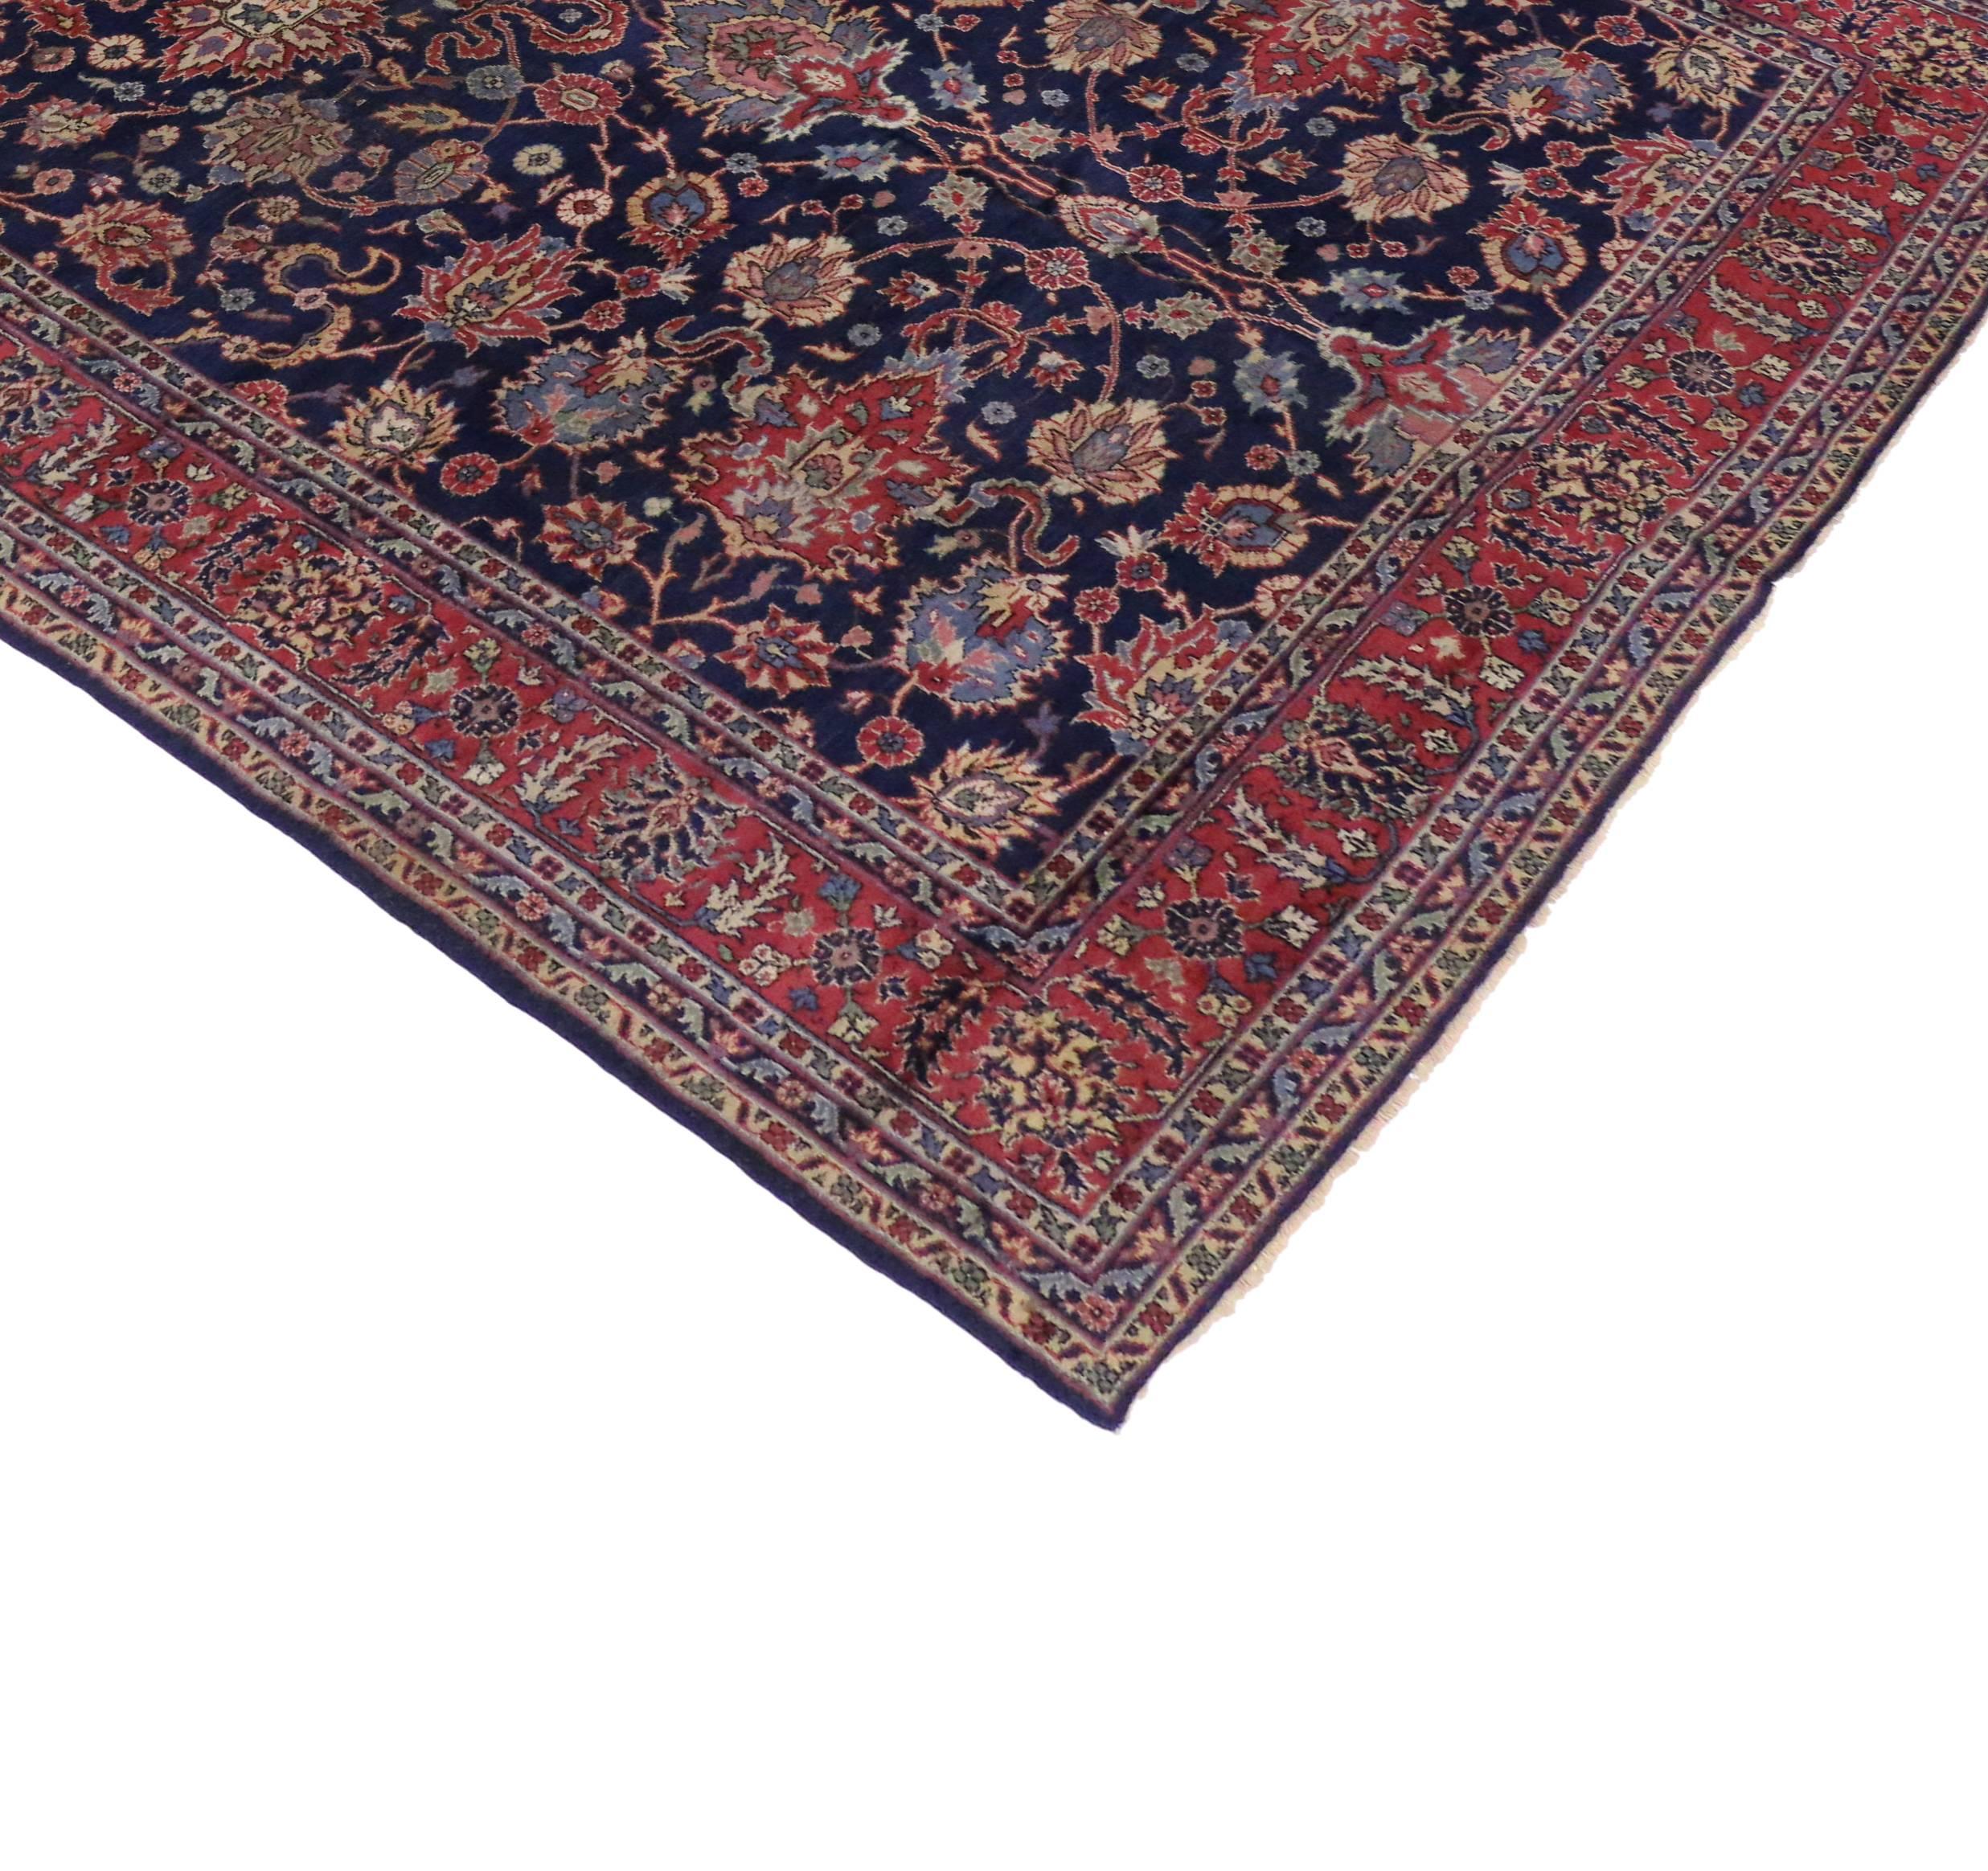 20th Century Antique Turkish Blue Sparta Gallery Rug with Old World French Chateau Style 